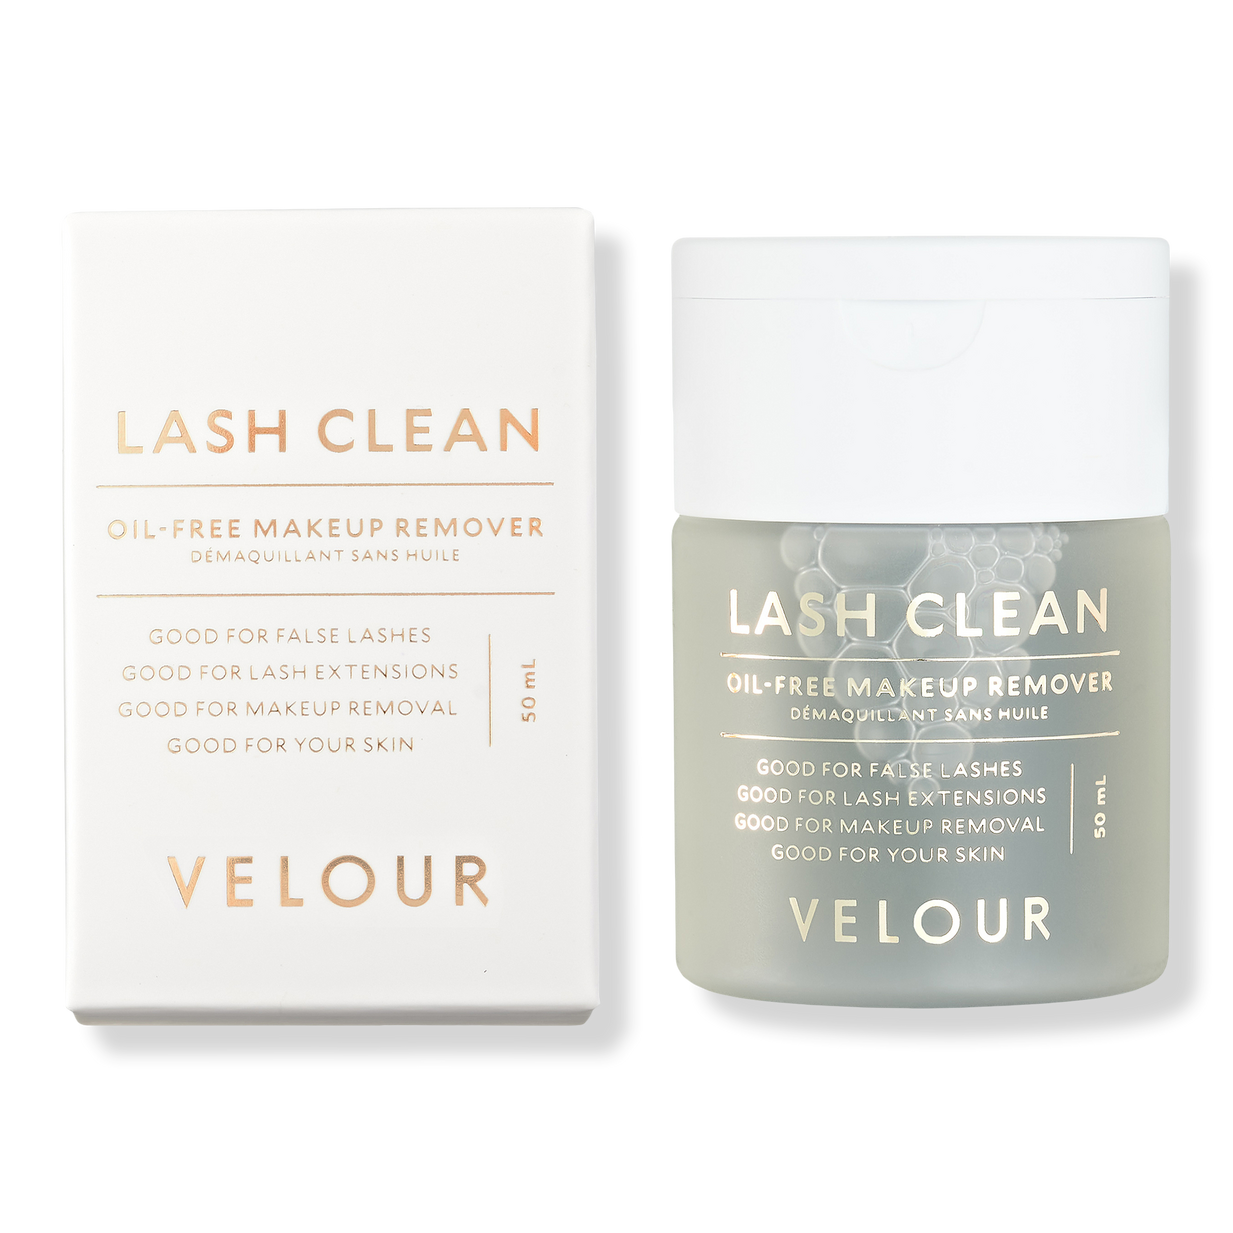  Velour Lash Clean and Reusable Cotton Round Bundle - Oil Free  Liquid Makeup Remover for Eyes, False Lashes, and Face, 140ml & Reusable  8ct Cotton Rounds : Beauty & Personal Care